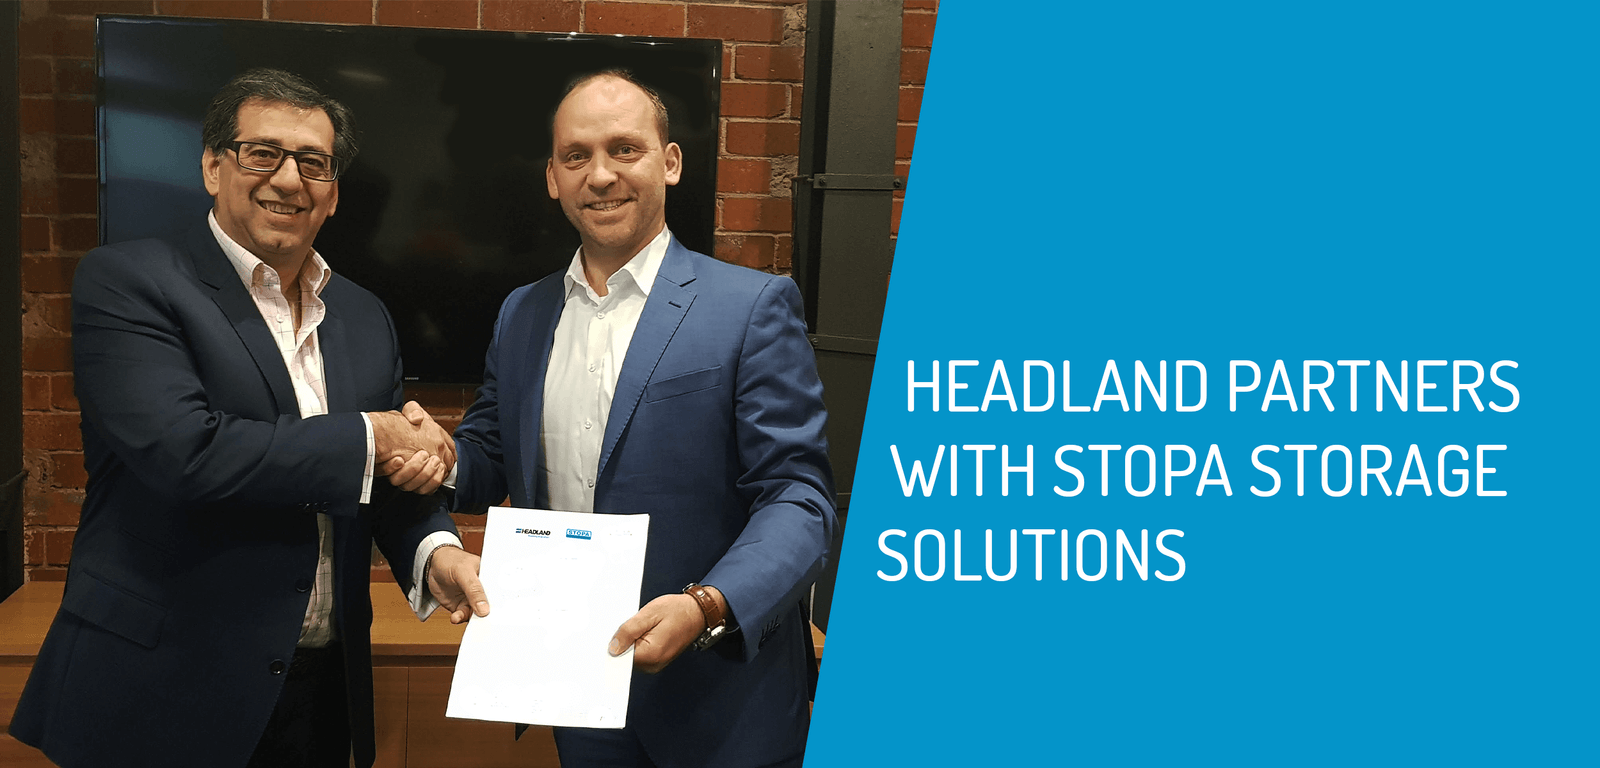 Headland Partners with Stopa Storage Solutions